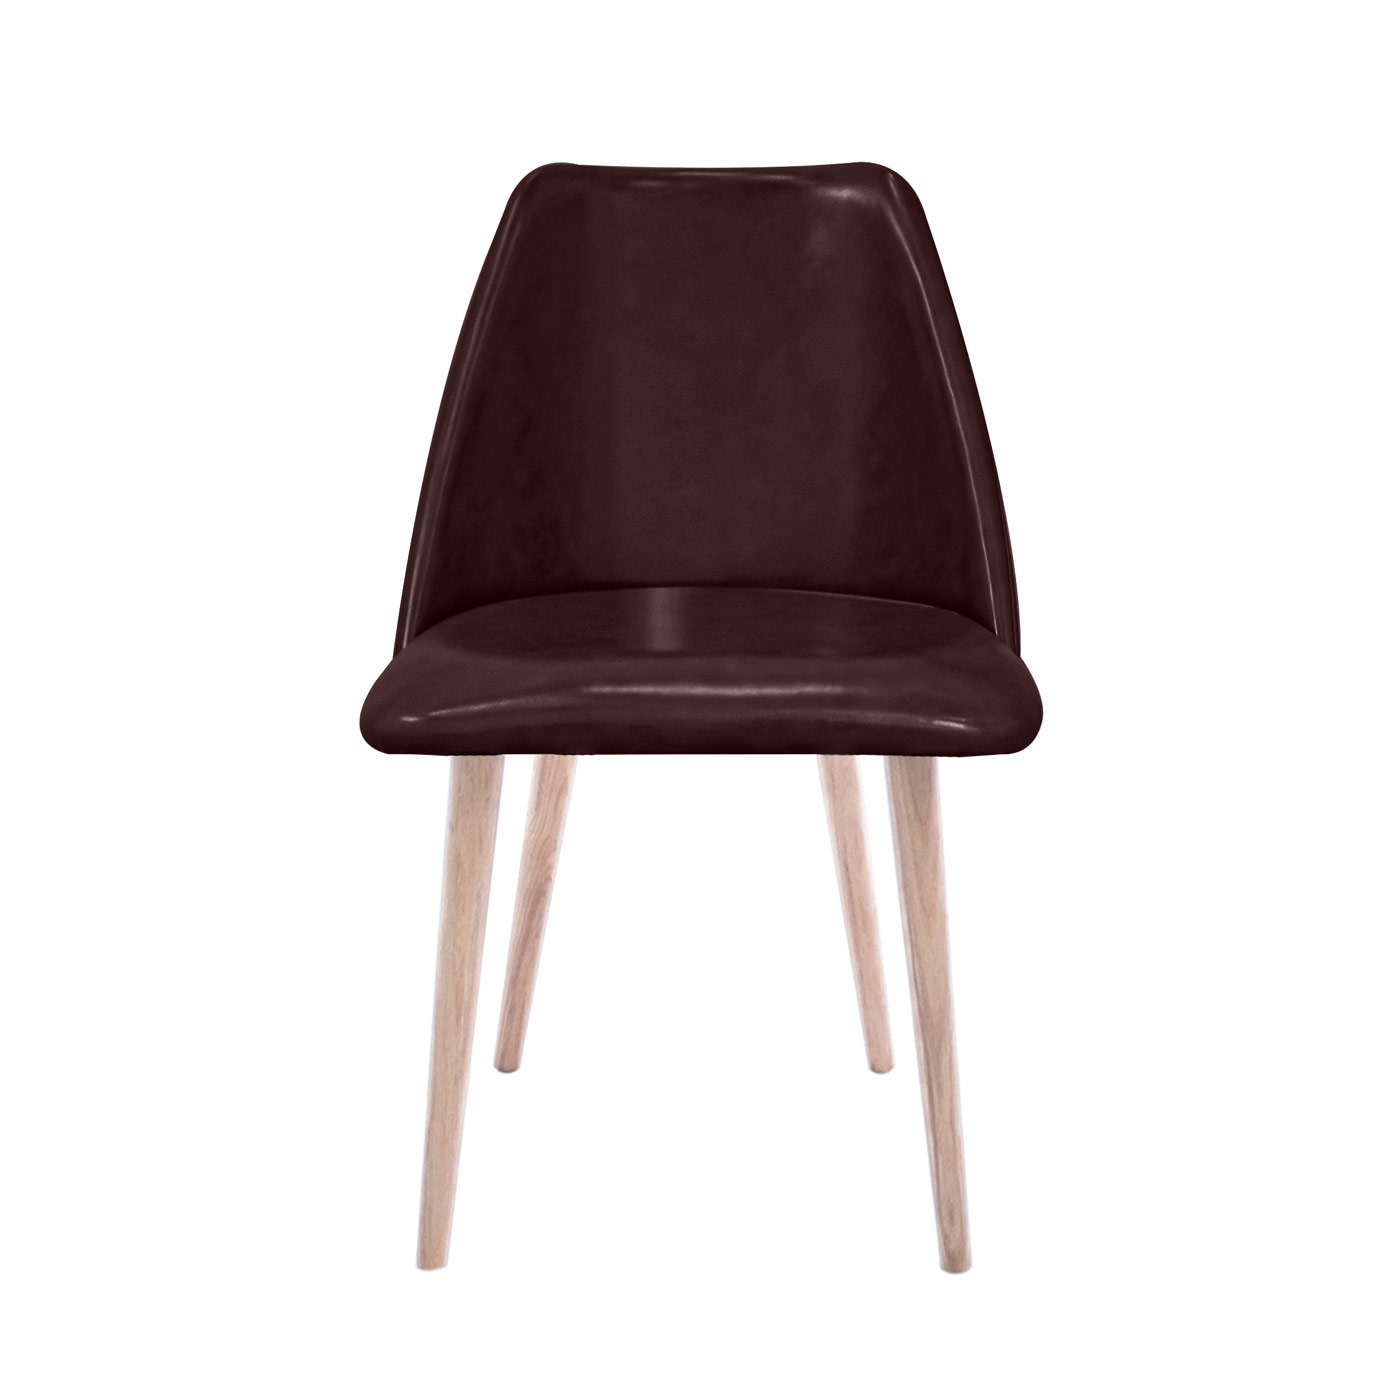 Elgin Faux Leather Light Dining Chair